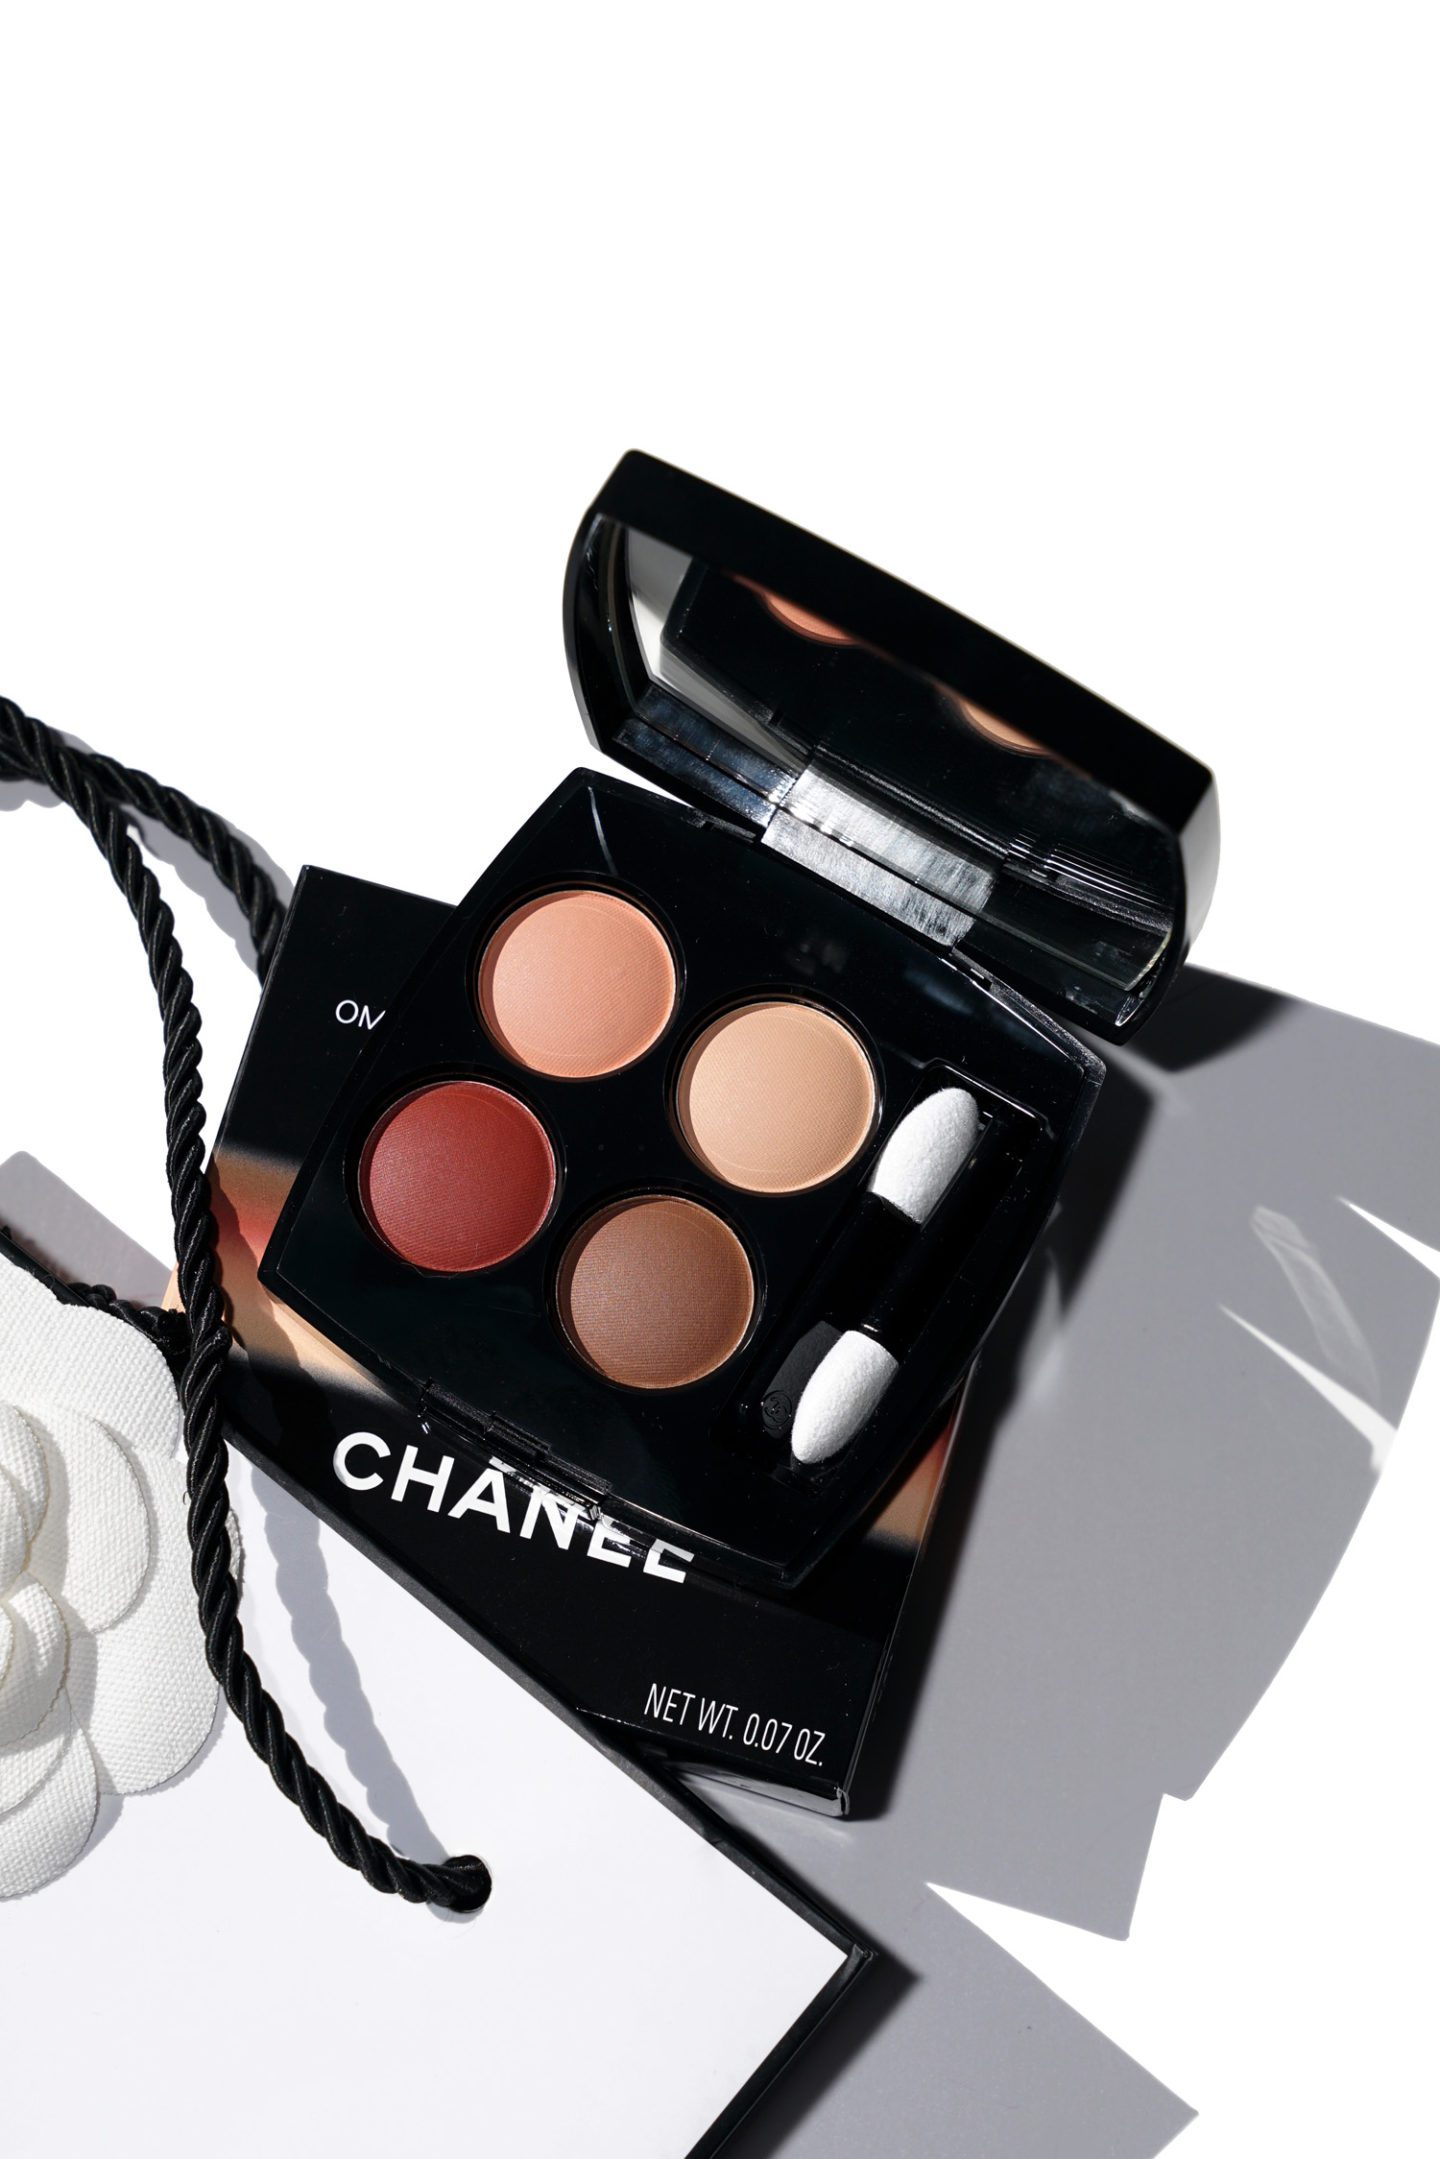 Chanel Legerete Et Experience Eyeshadow Quad - Les 4 Ombres | The Beauty Look Book